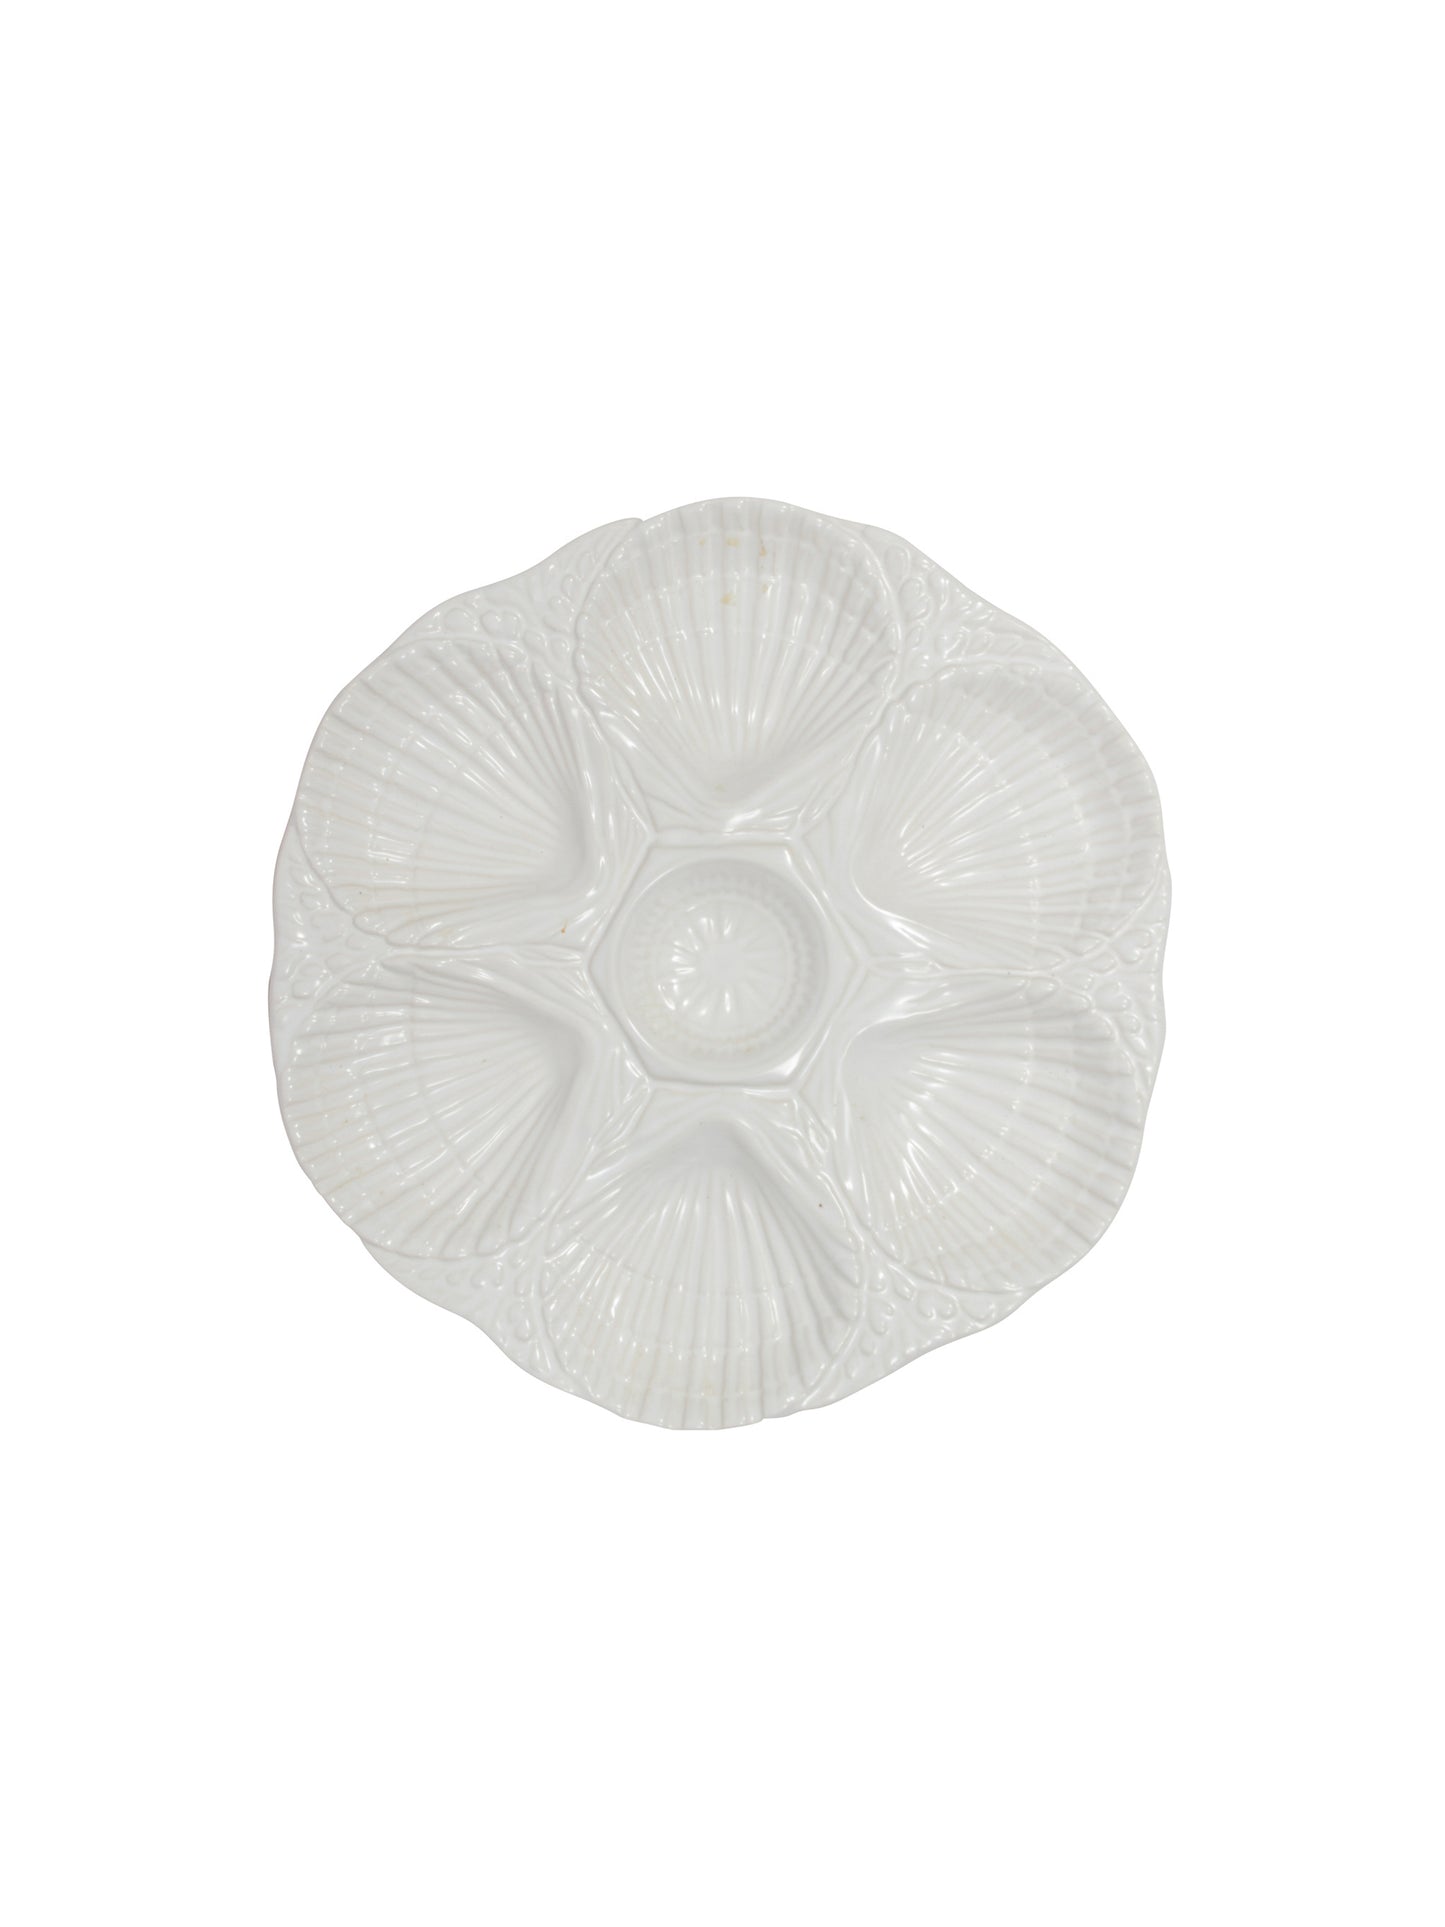 Vintage Olfaire White Oyster Plate